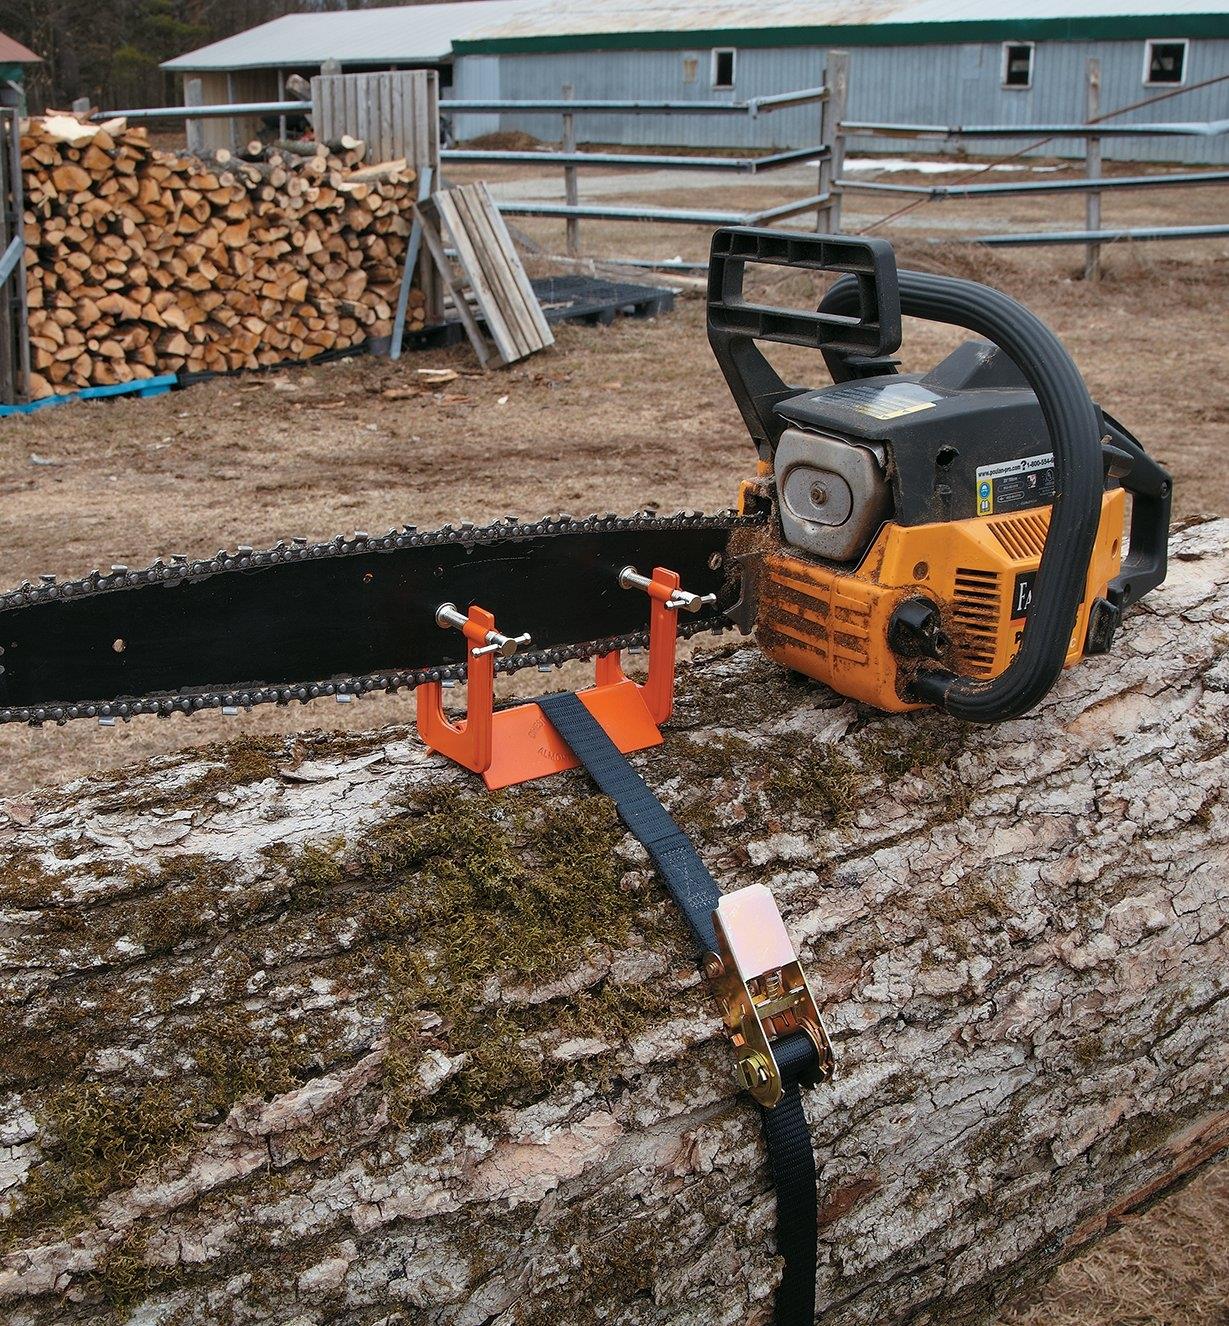 Vise clamped onto a chain-saw blade and tied to a log with the included strap